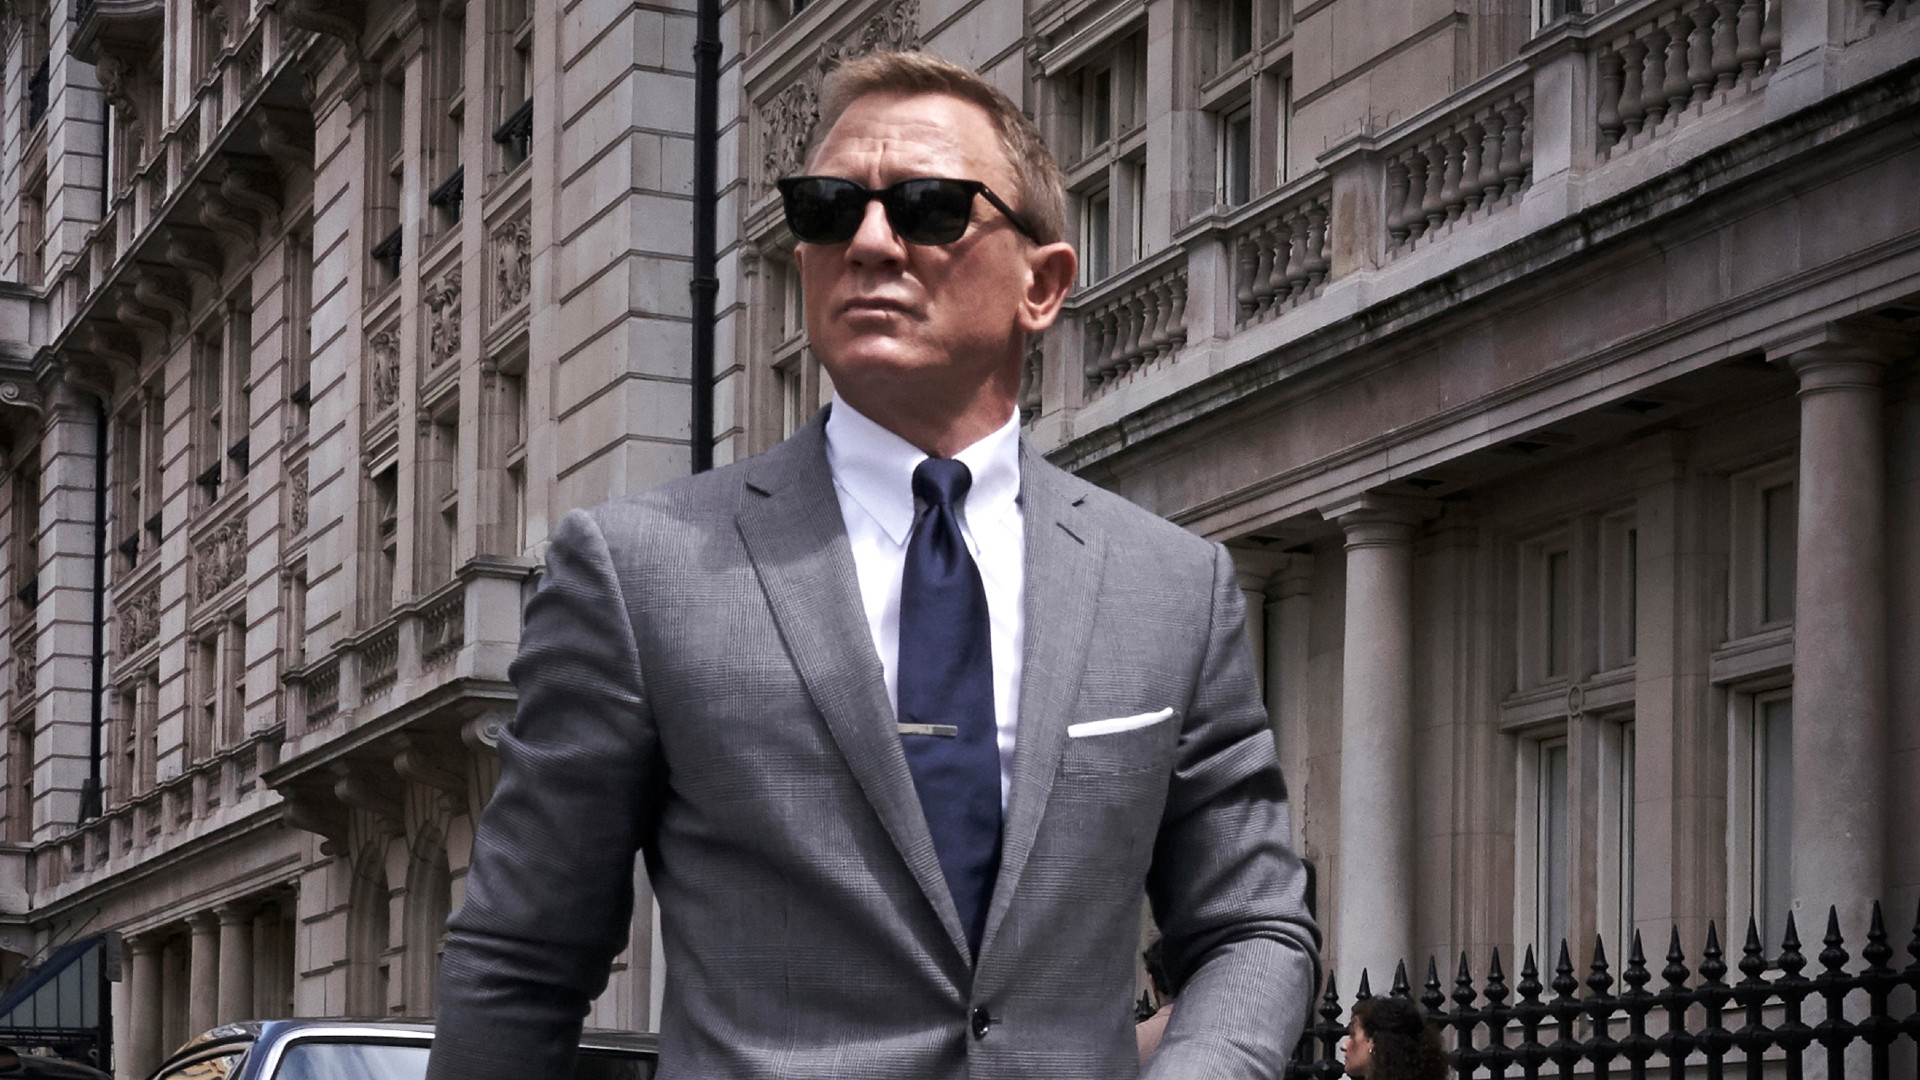 Daniel Craig stated that he wanted to kill James Bond